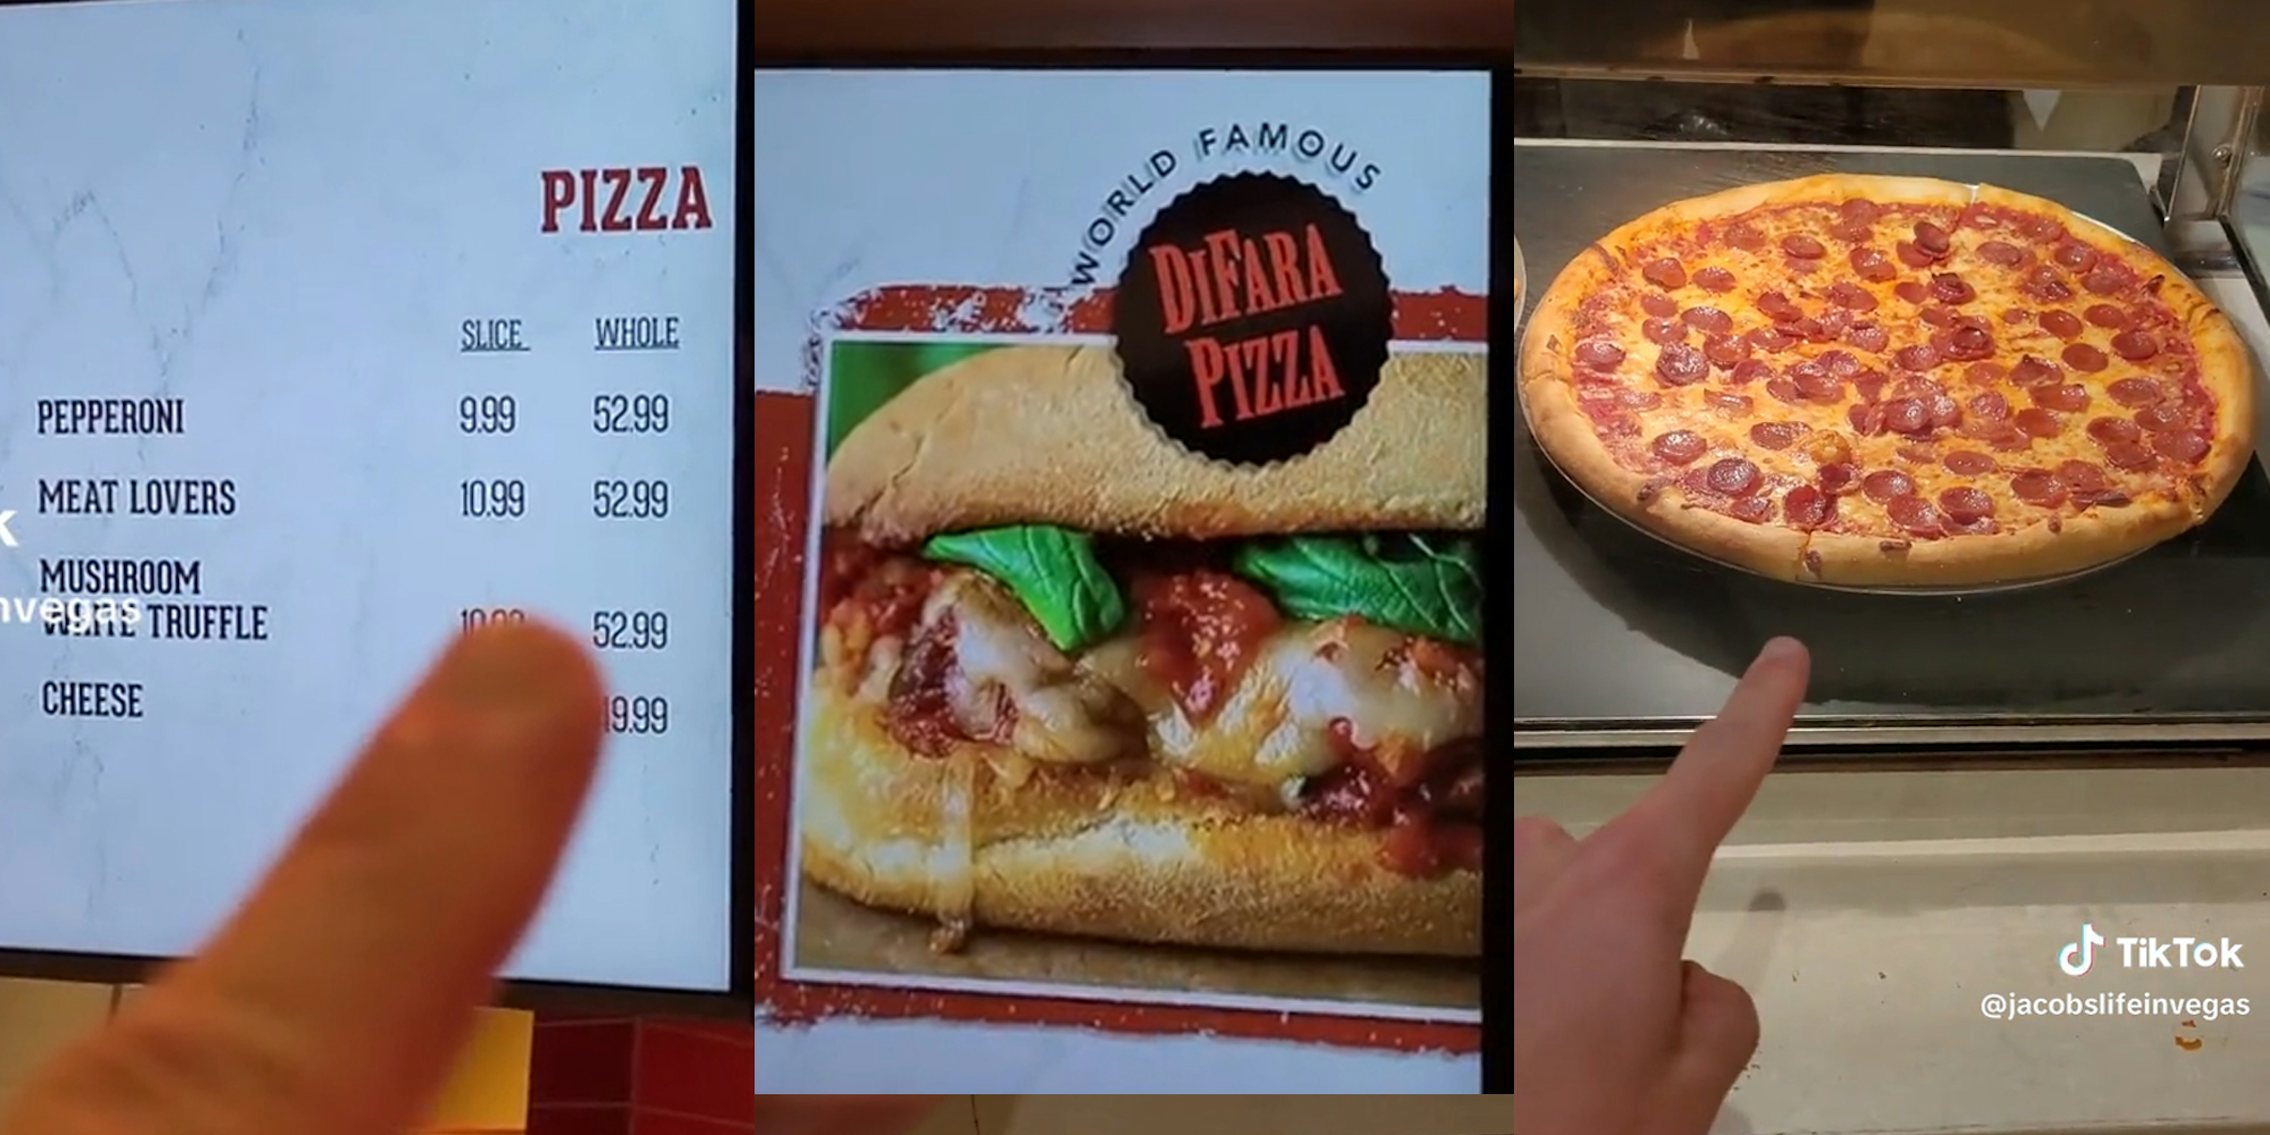 man pointing out $53 pizza at DiFara's in Las Vegas